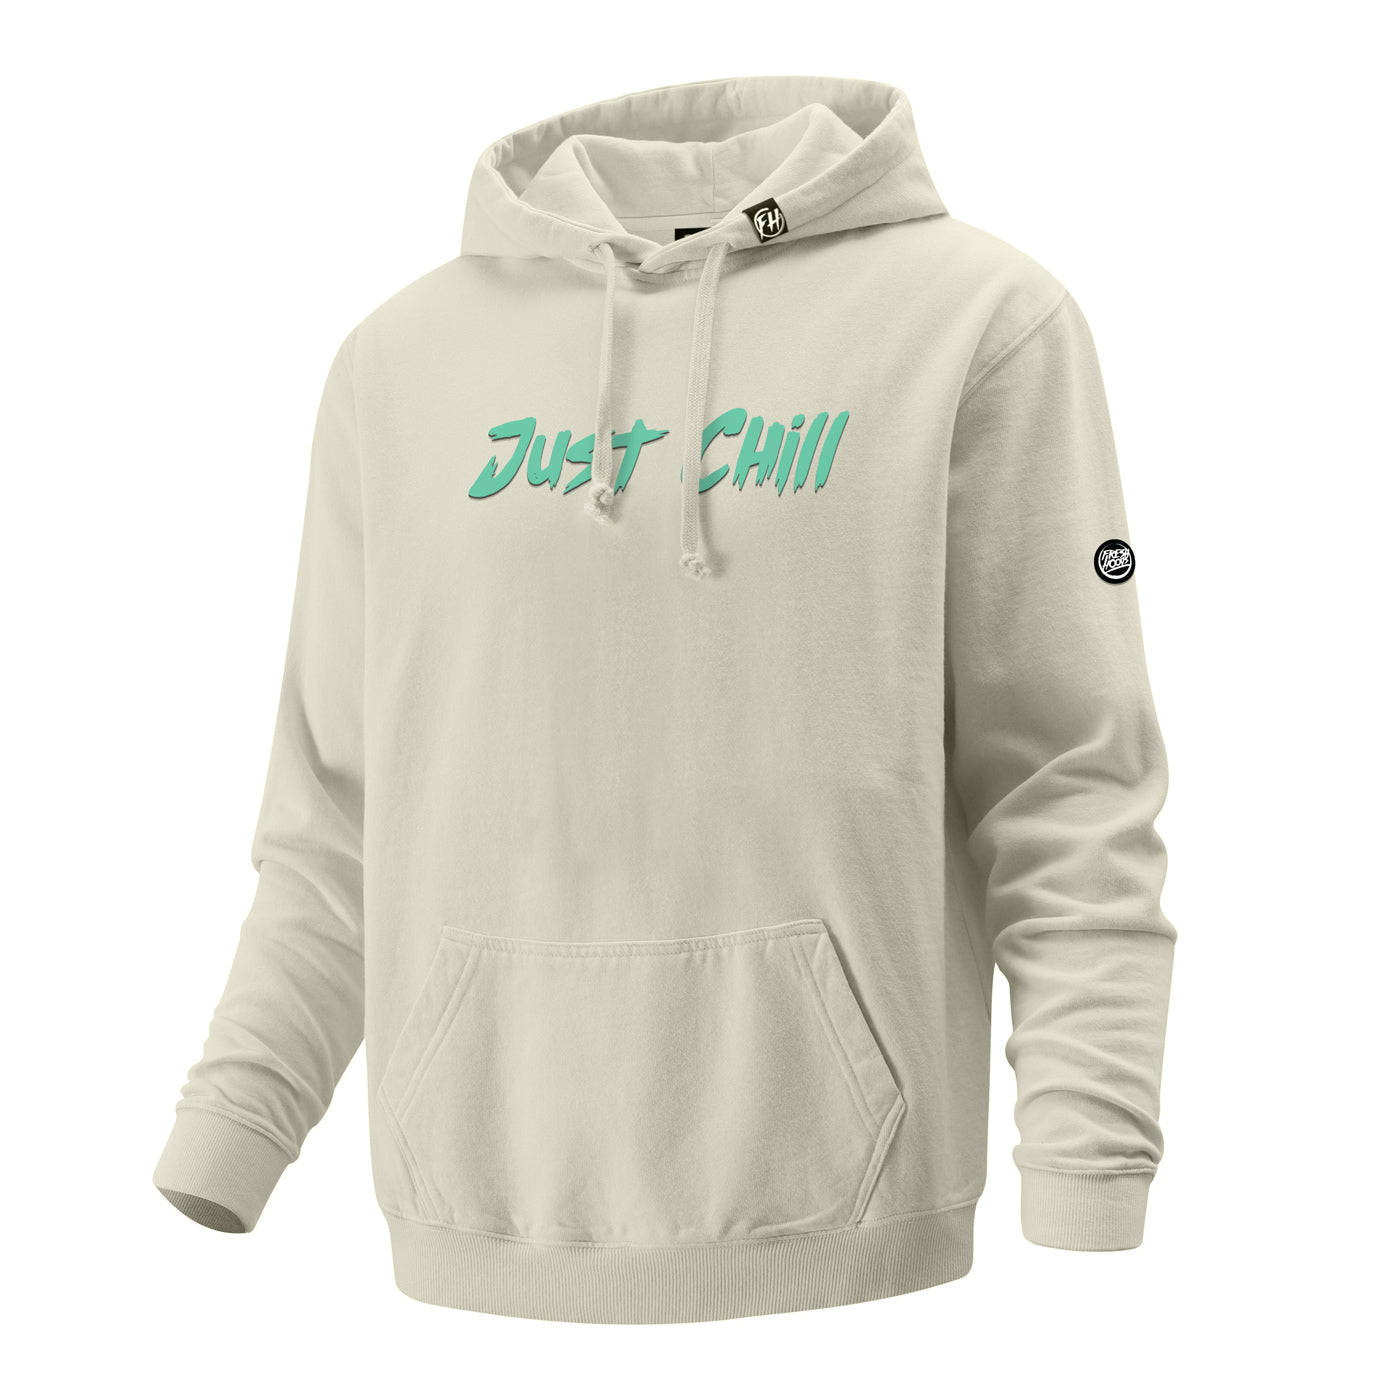 Just Chill Hoodie